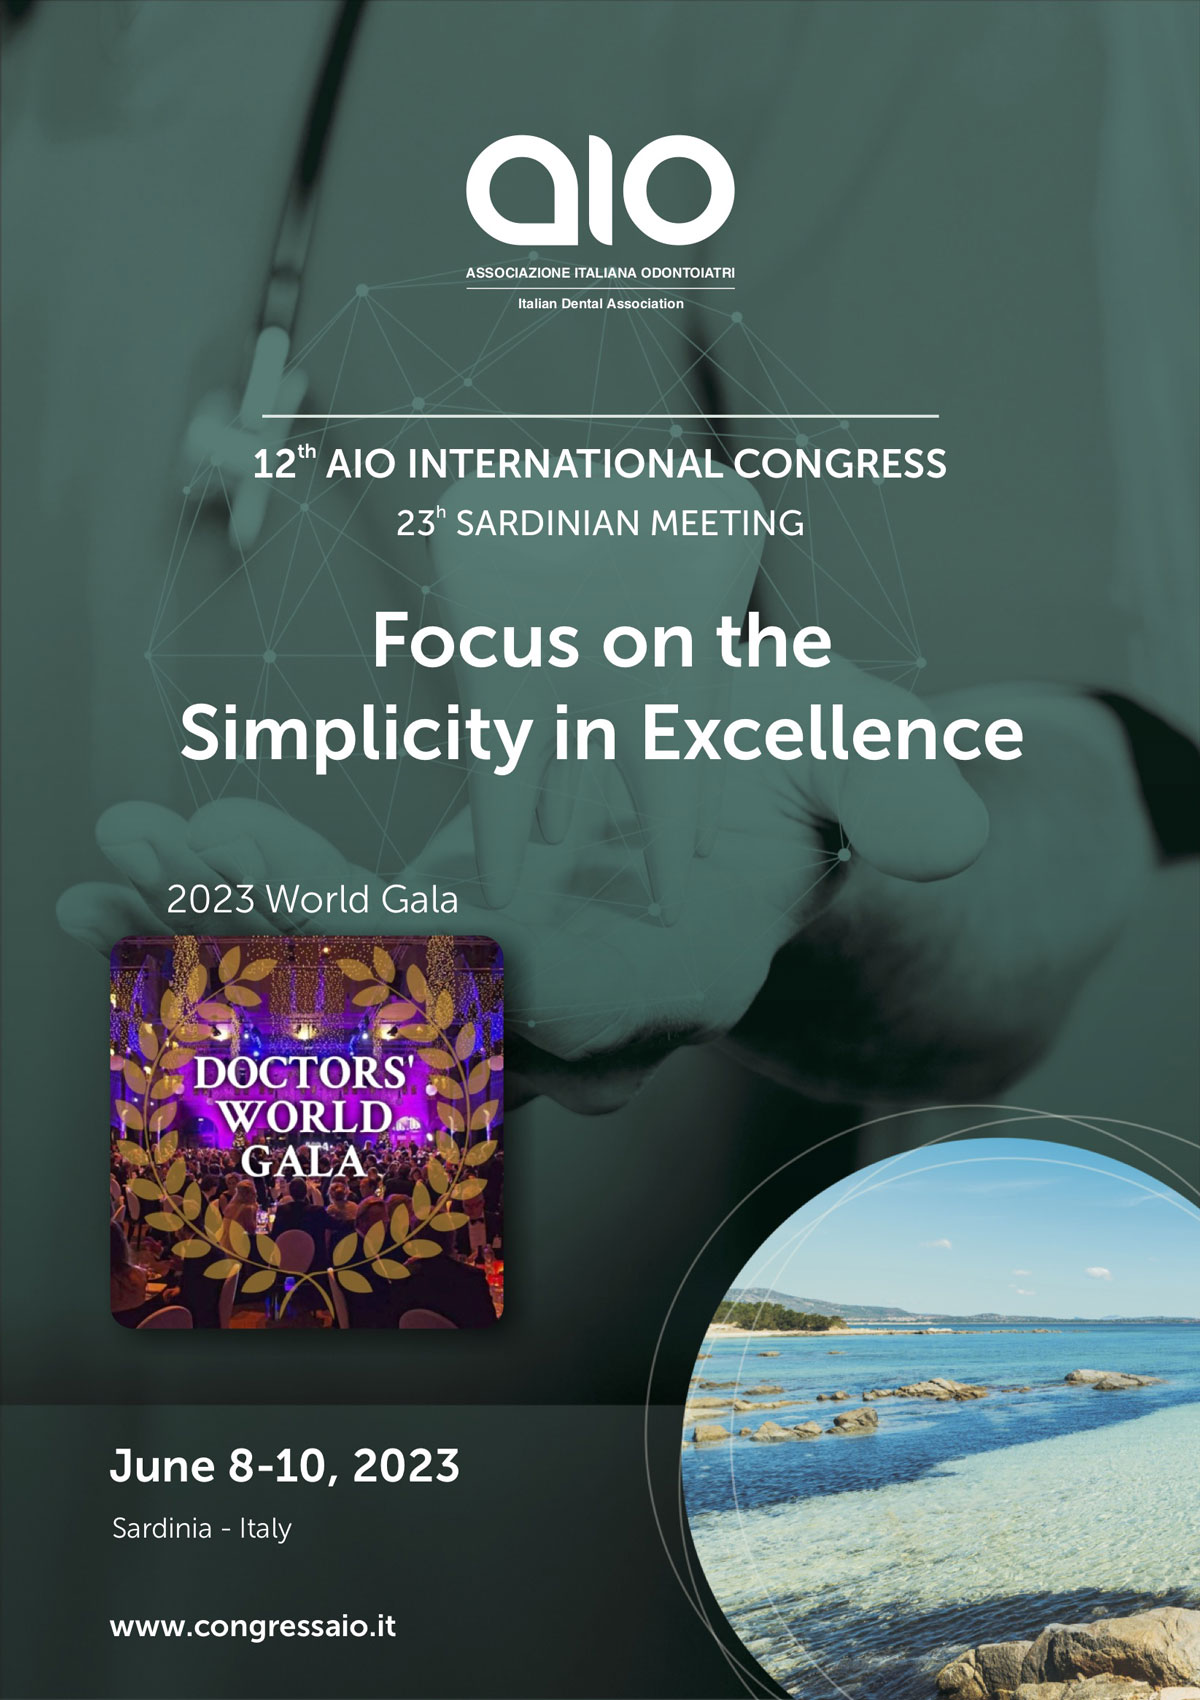 12th AIO International Congress “Focus on the Simplicity of Excellence” from June 8-10, 2023